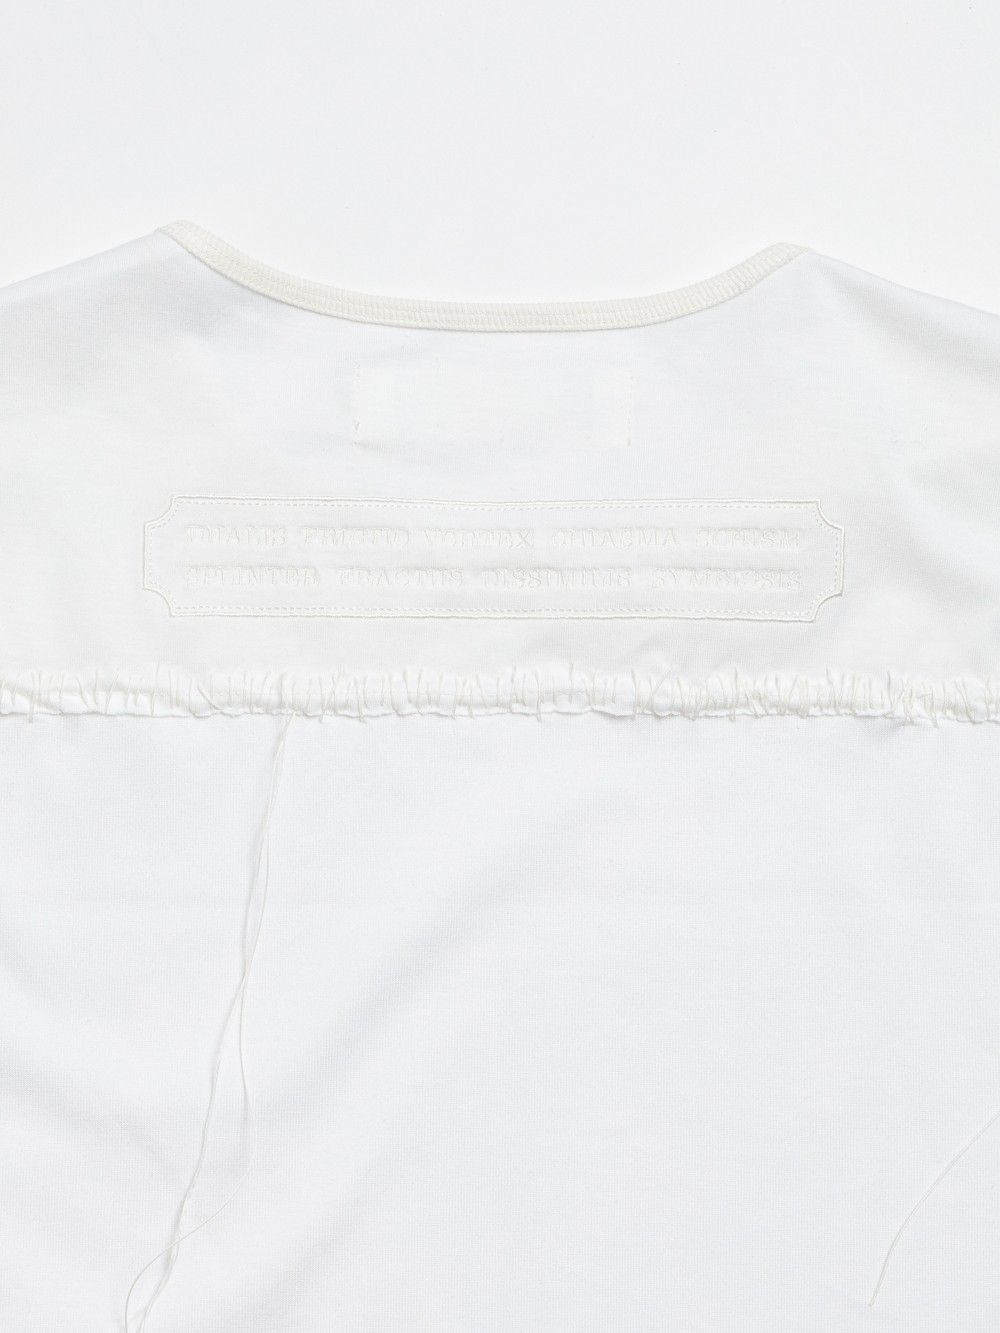 POCKT-EMBROIDERY TEE